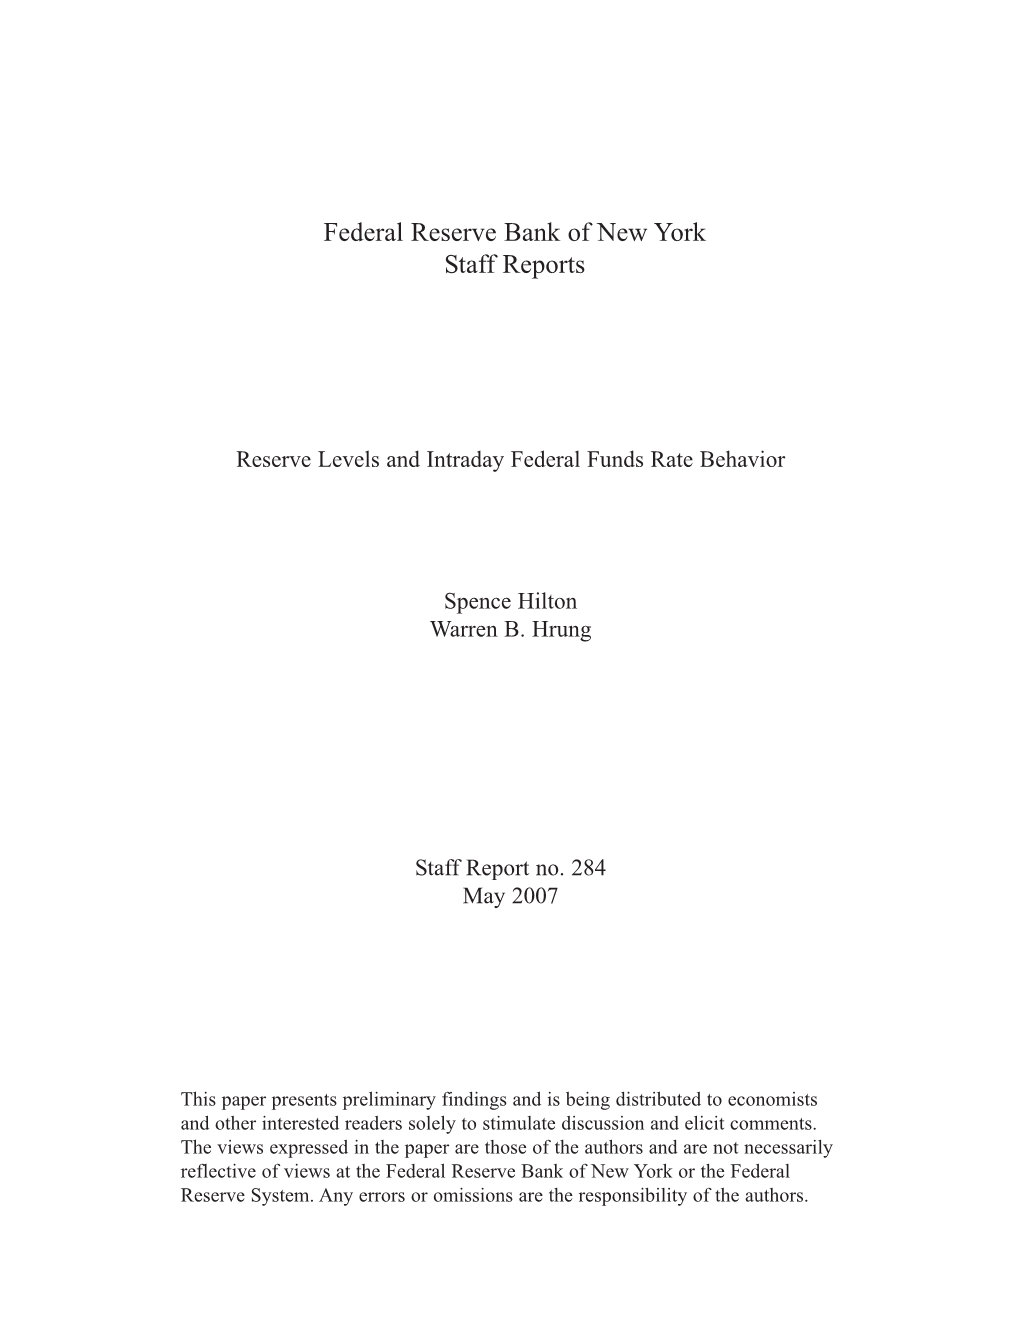 Reserve Levels and Intraday Federal Funds Rate Behavior